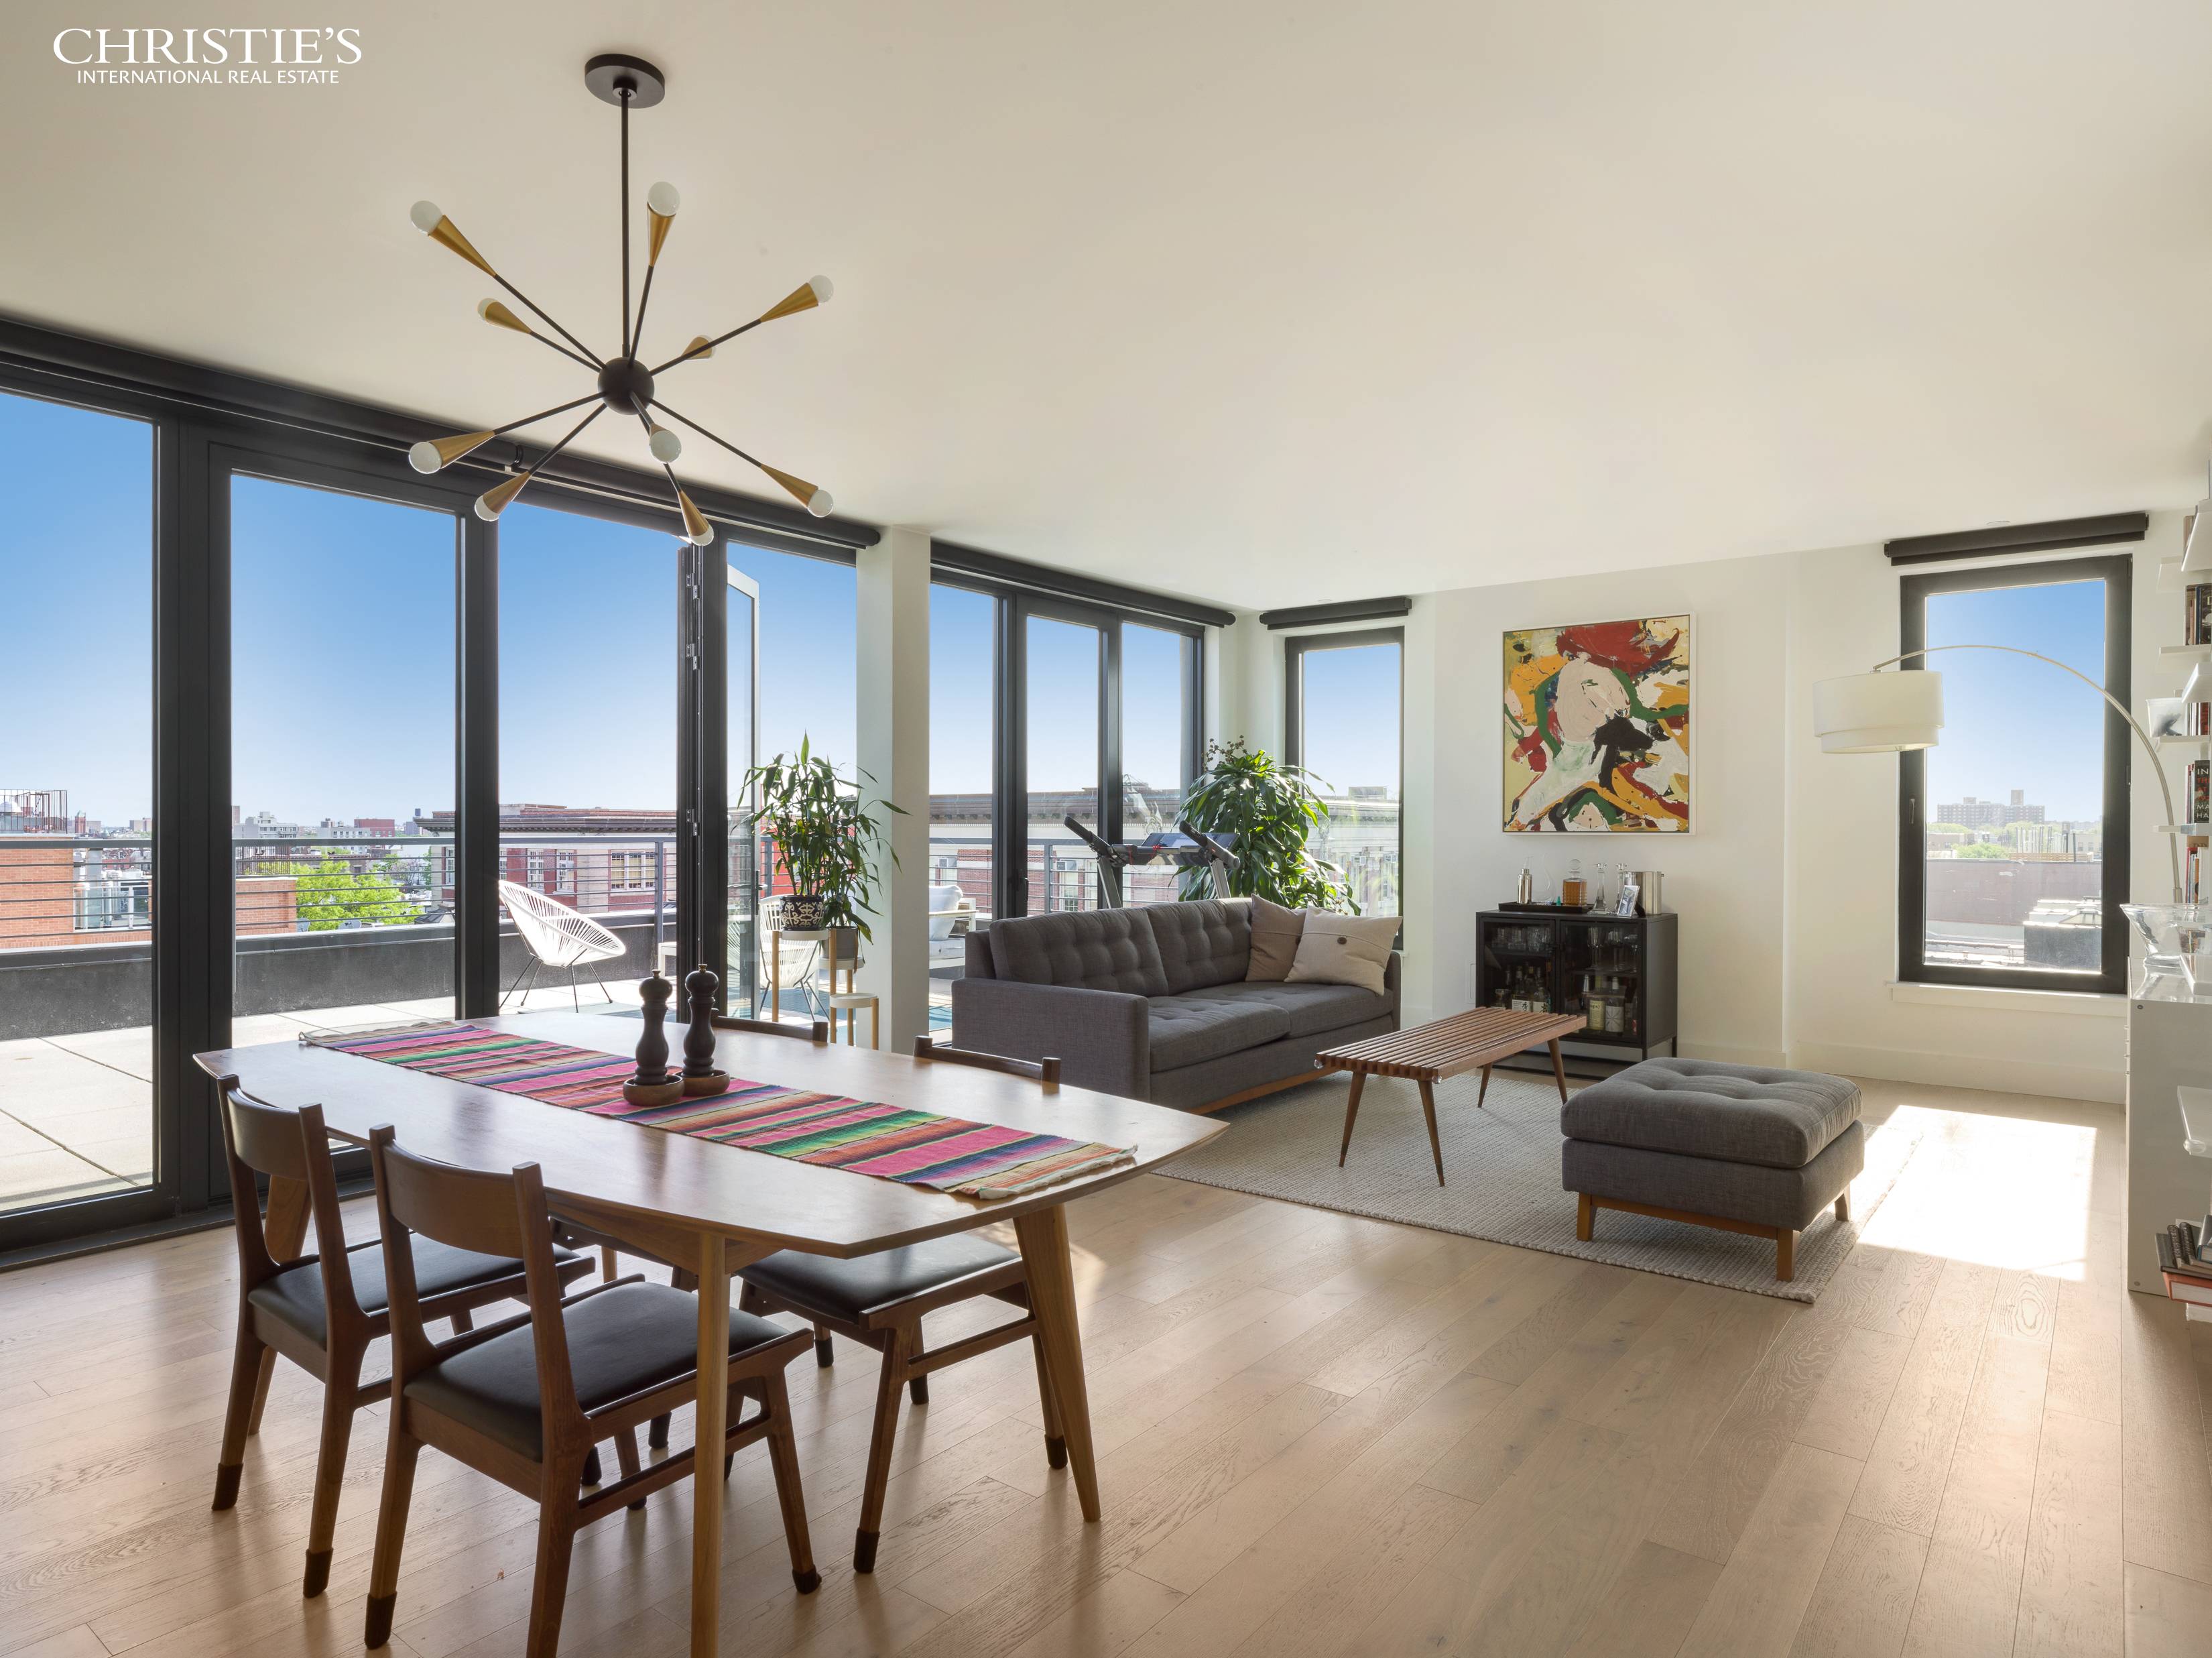 Crown Heights Crown Jewel PH1 at 762 Park Place is a three bedroom, two bathroom with walls of glass offering panoramic views of the Manhattan and downtown Brooklyn skylines.